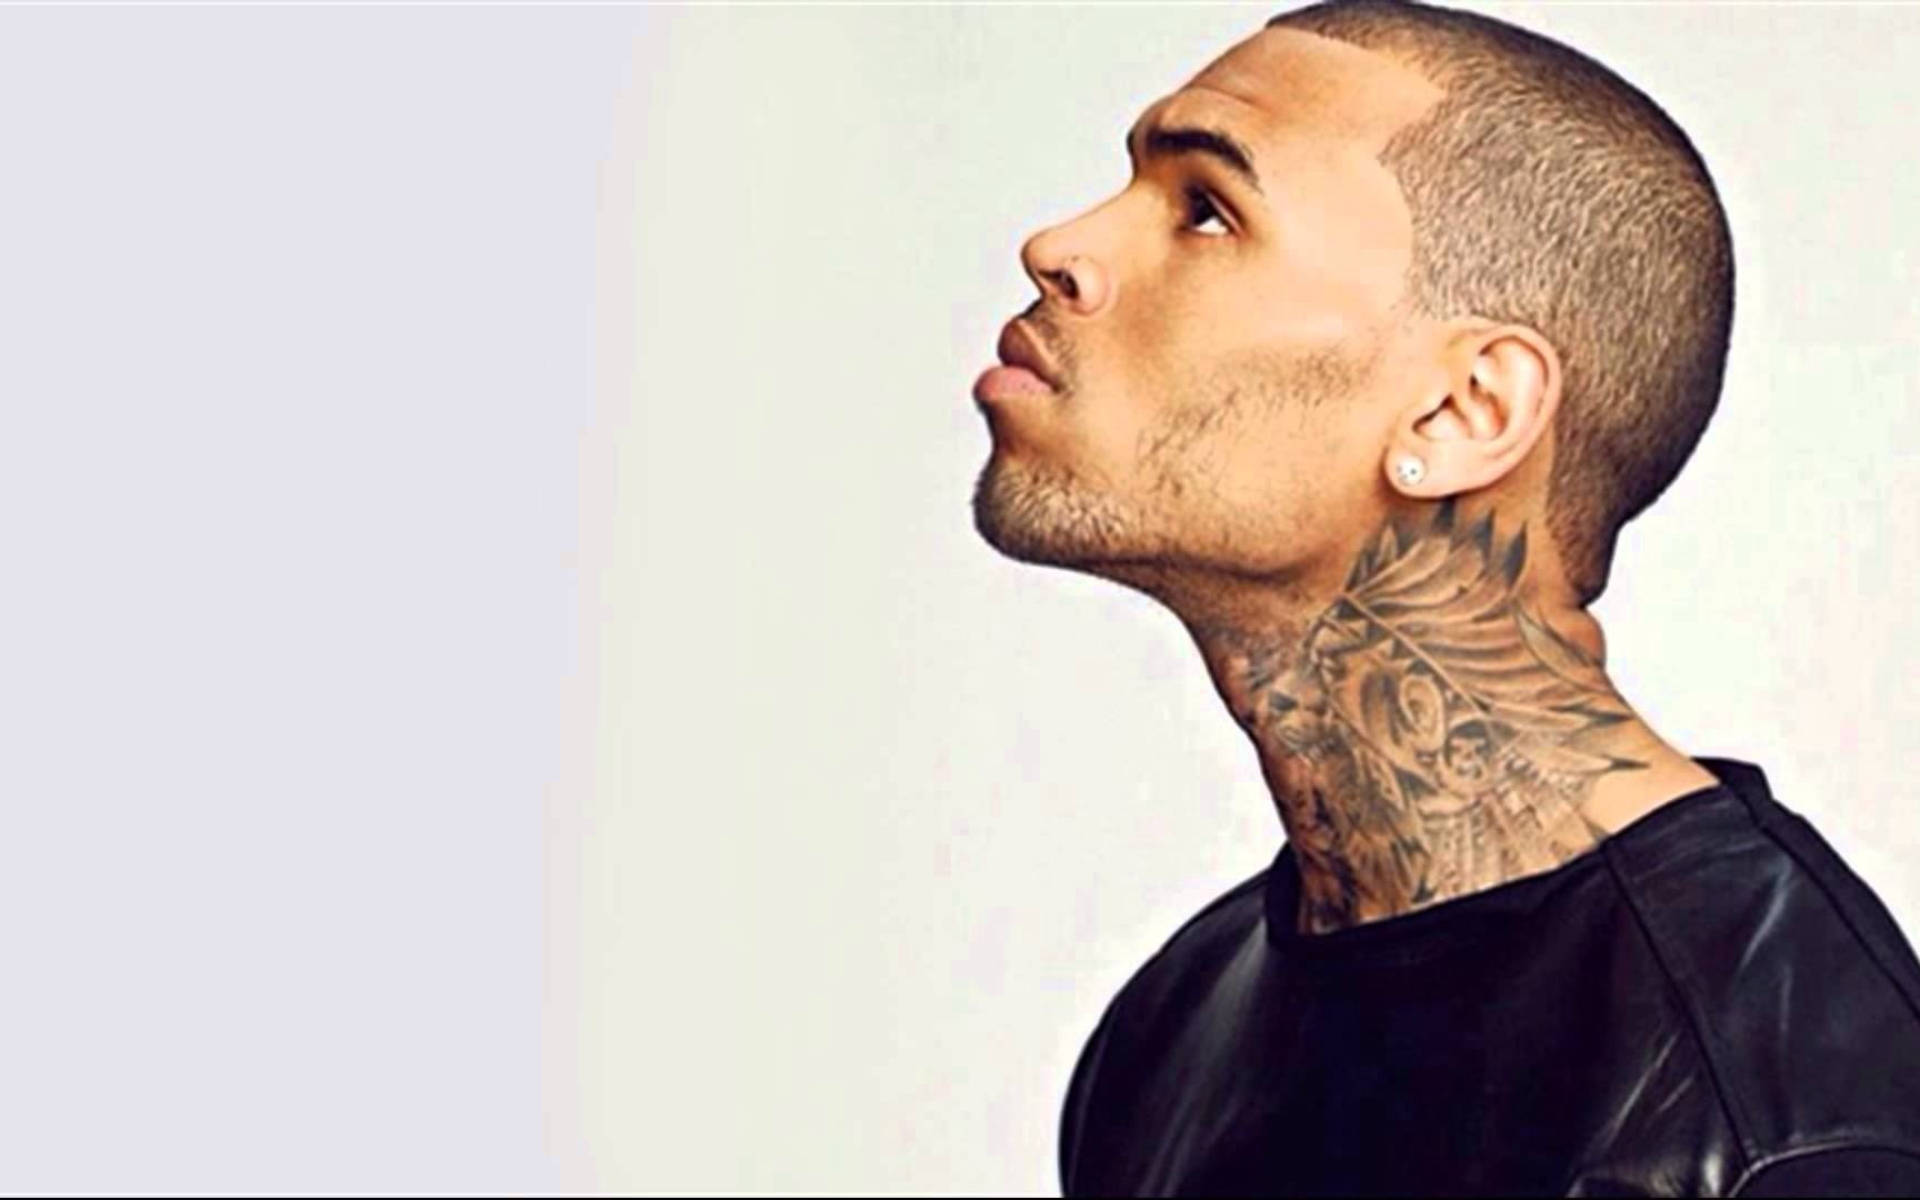 Chris Brown Side Profile Background